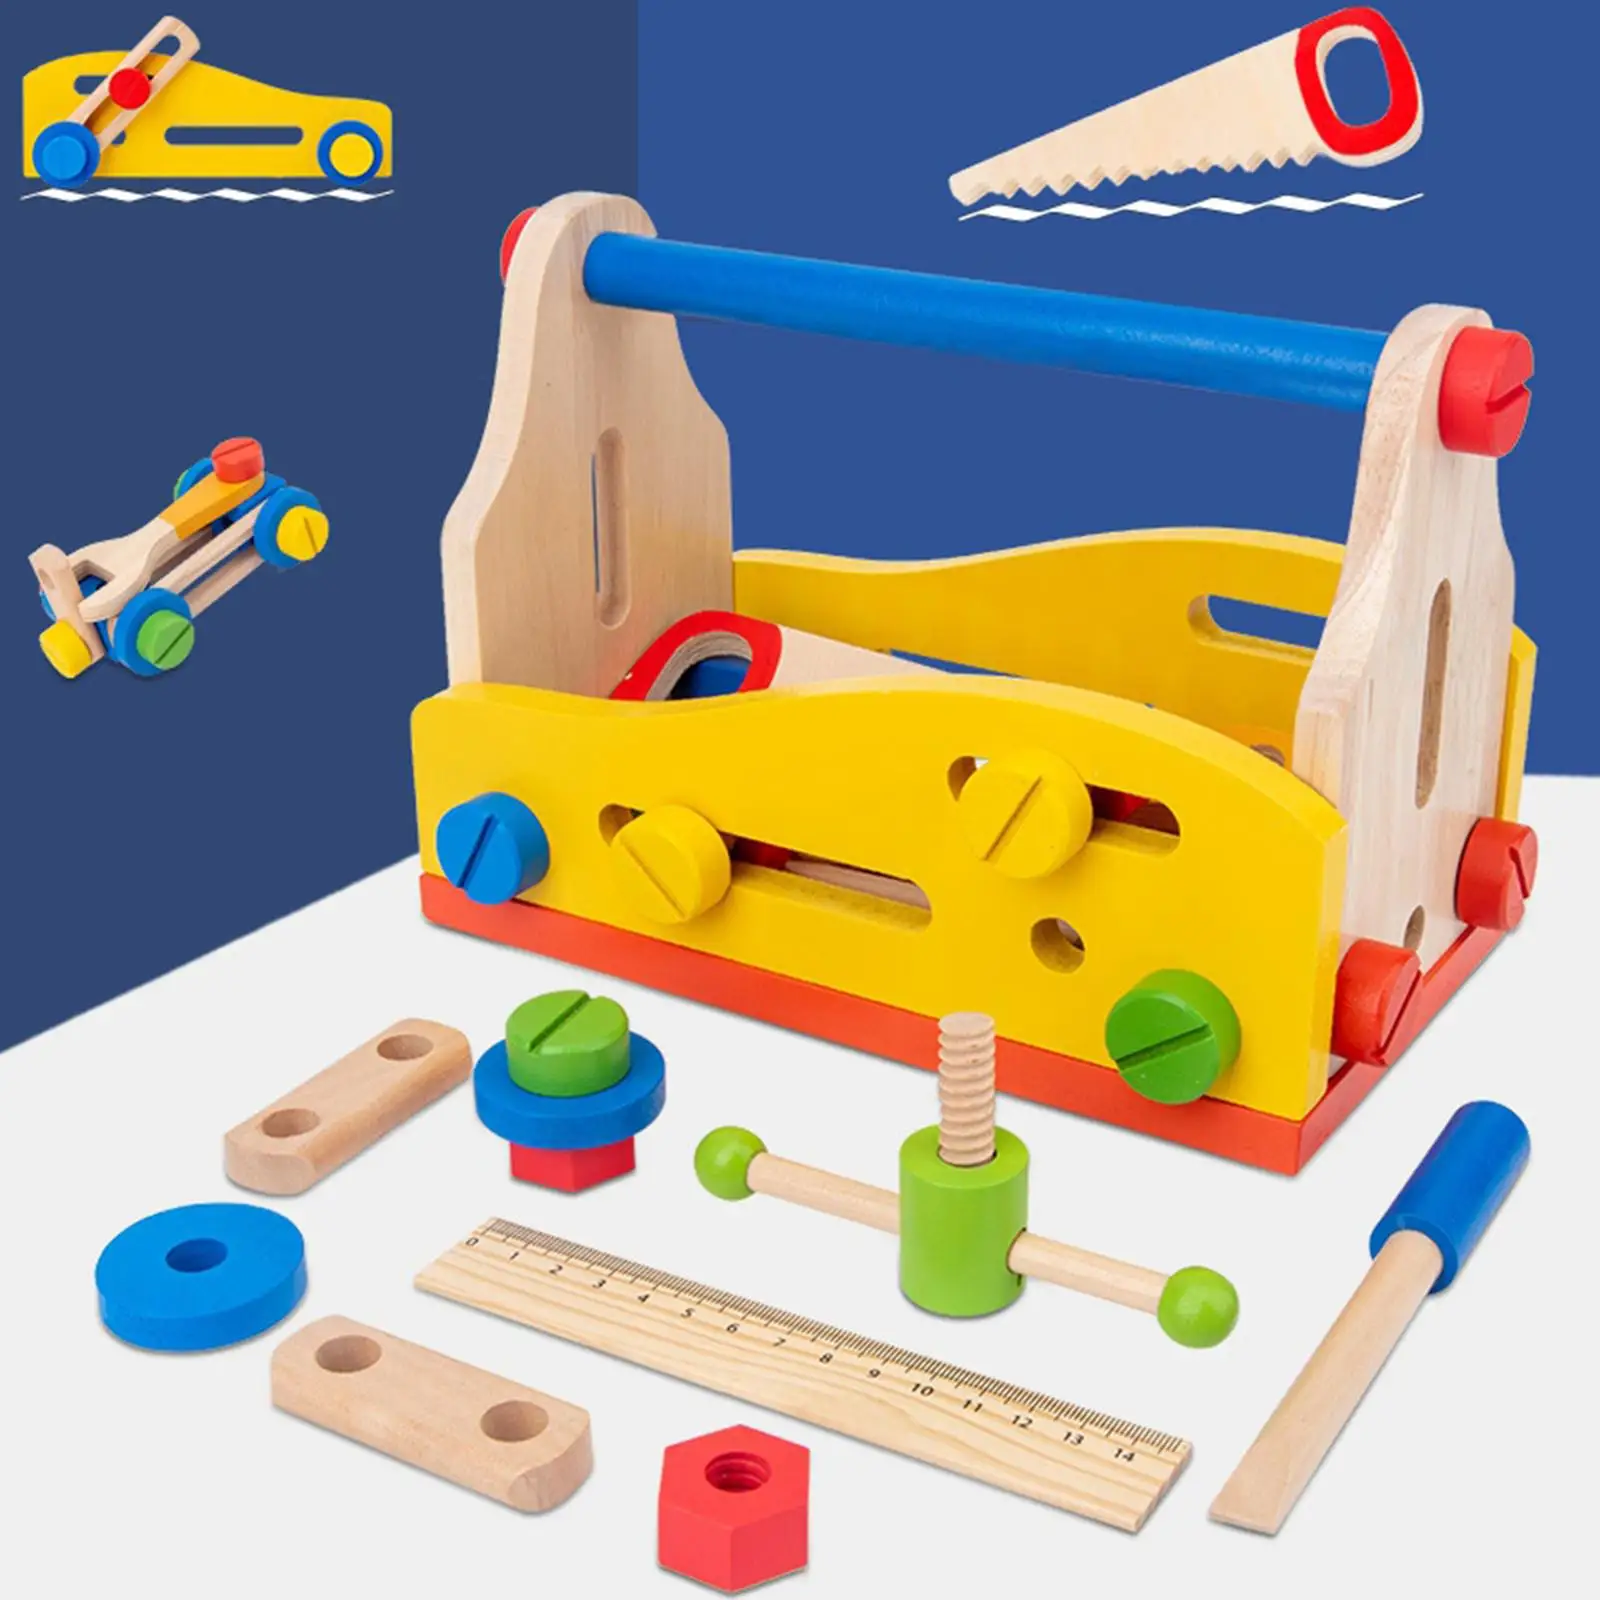 Wooden Tool Toy Learning Educational Tool for Children